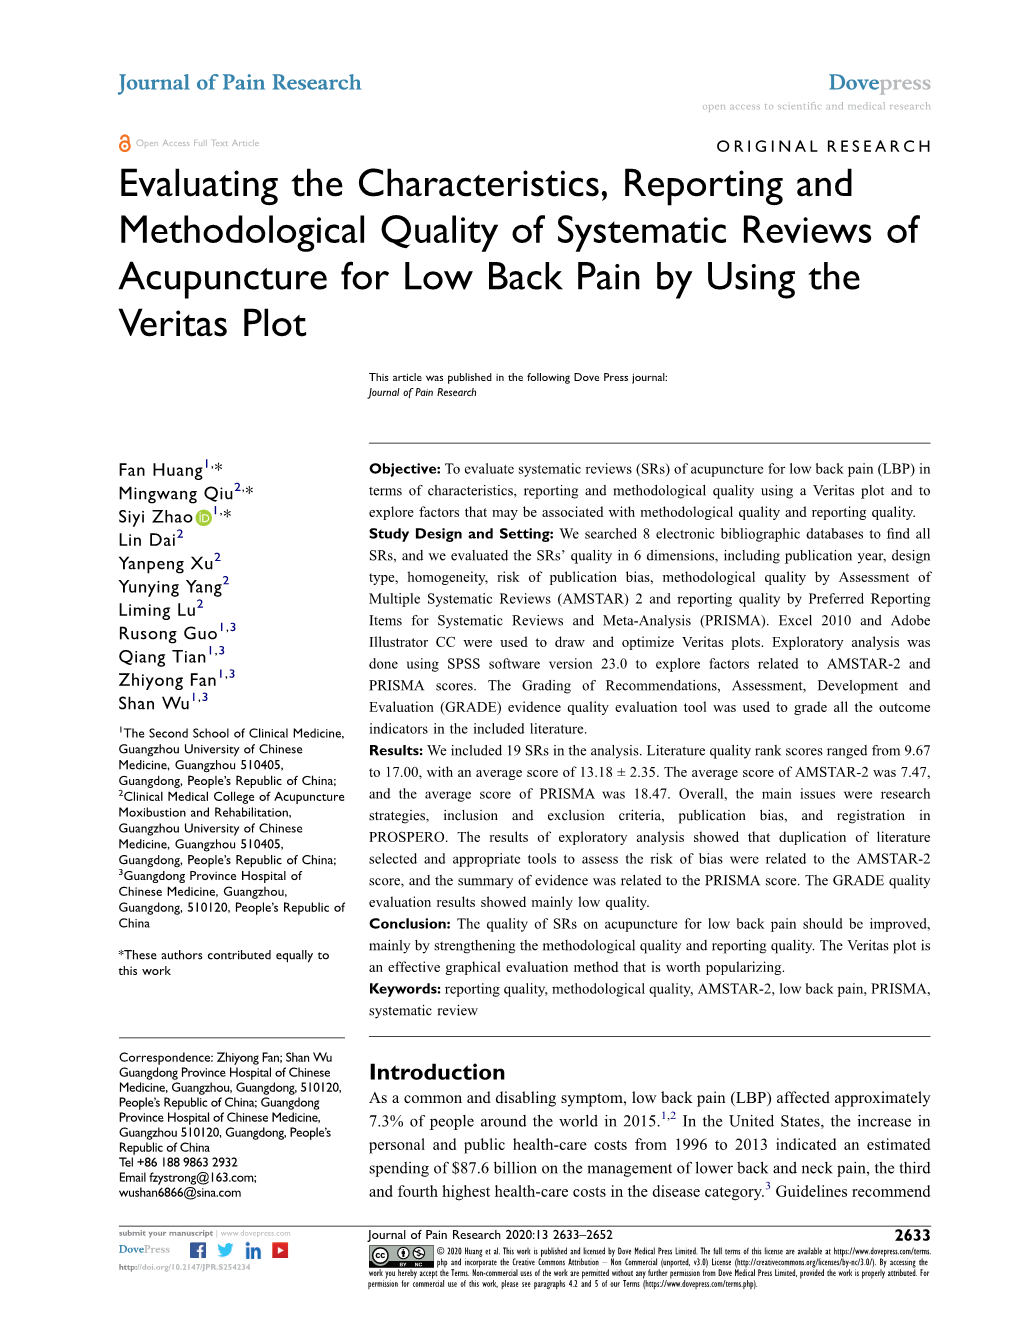 Evaluating the Characteristics, Reporting and Methodological Quality of Systematic Reviews of Acupuncture for Low Back Pain by Using the Veritas Plot